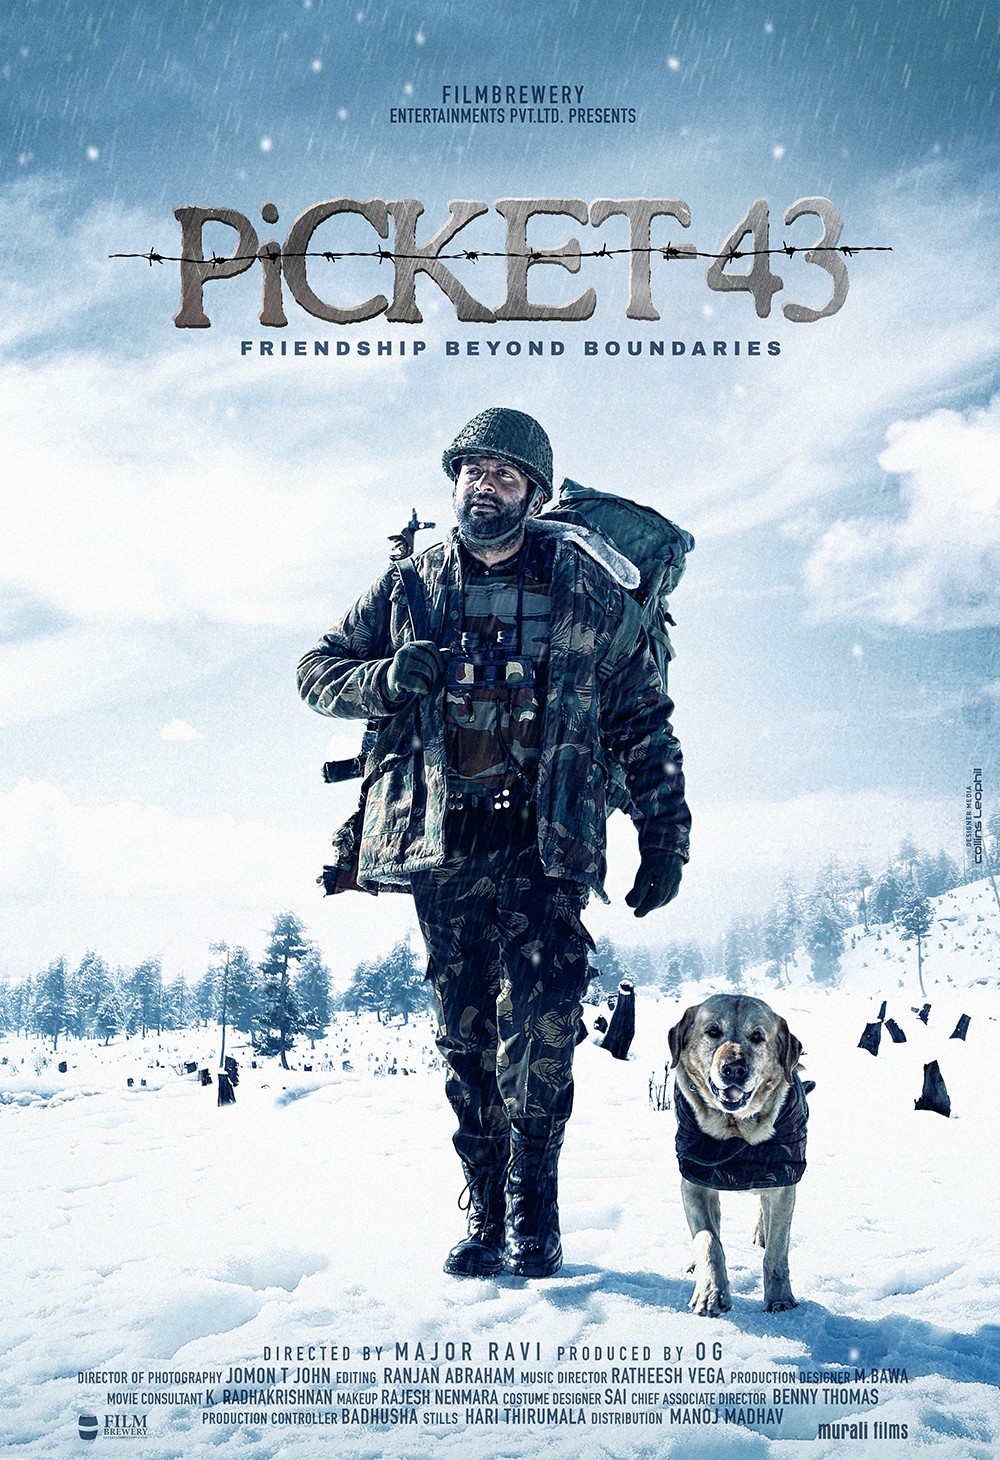 Extra Large Movie Poster Image for Picket 43 (#2 of 8)